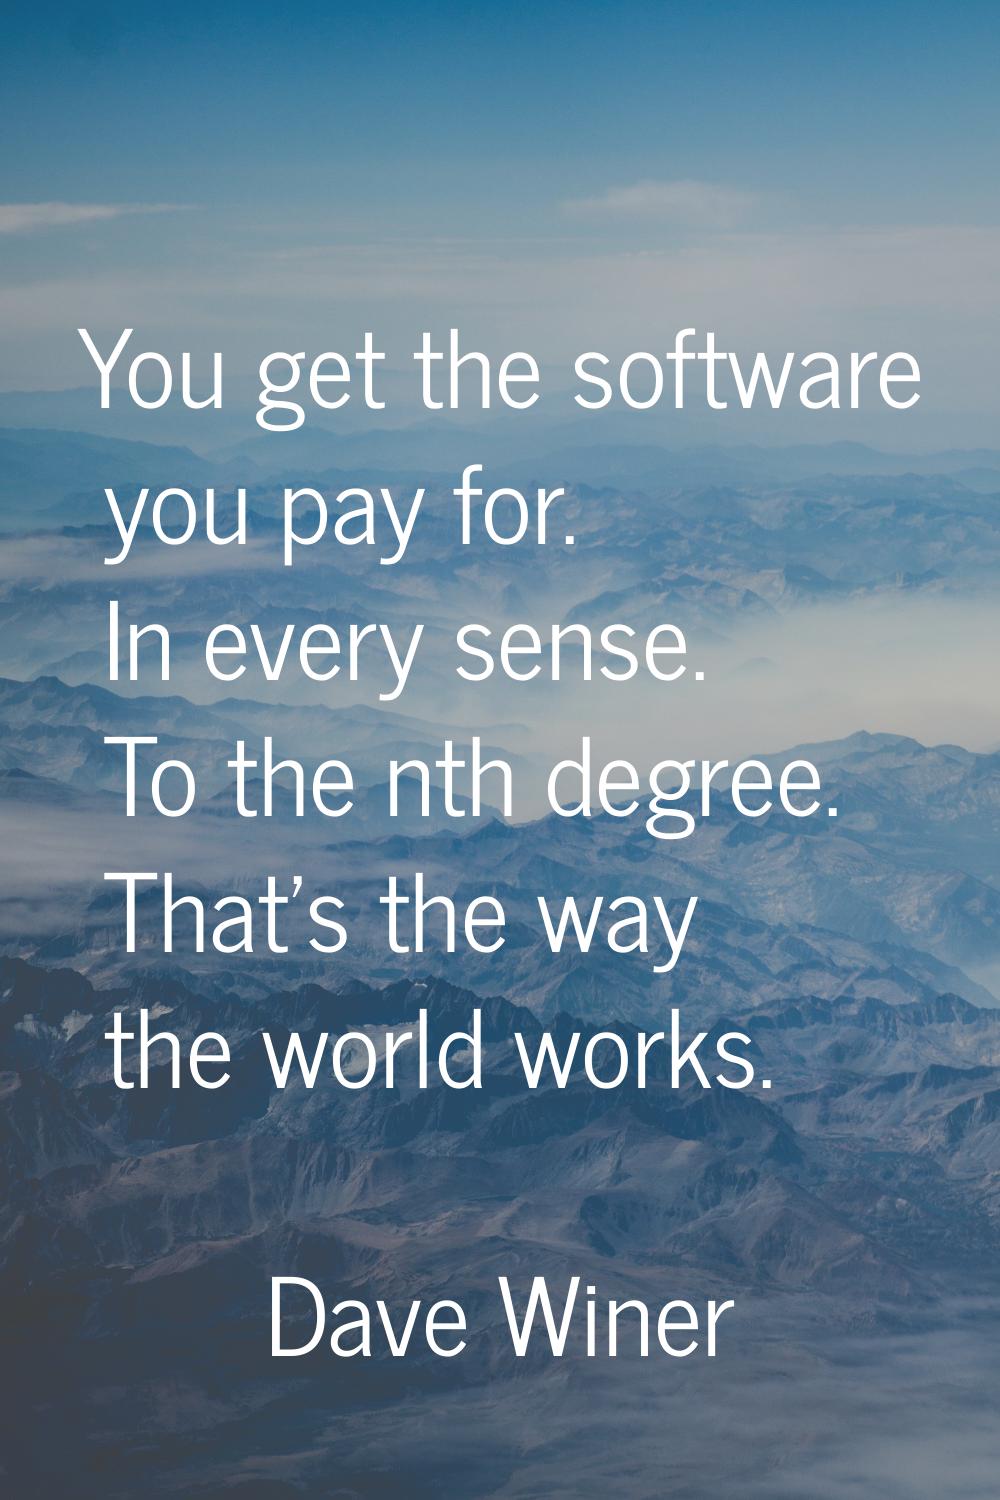 You get the software you pay for. In every sense. To the nth degree. That's the way the world works